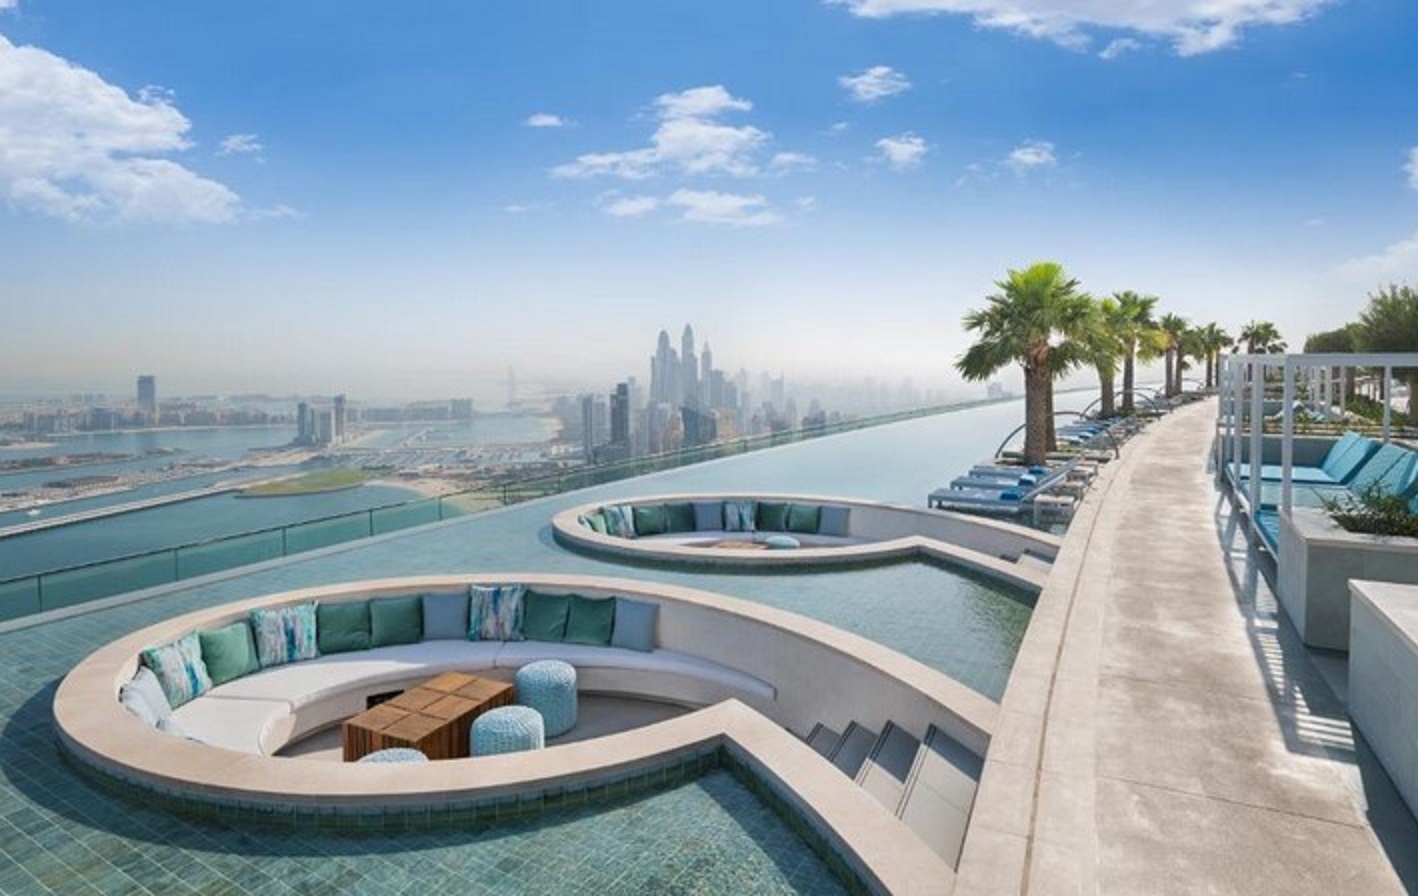 Enjoy May Bank Holiday relaxing in one of the World's Highest Infinity Pools in Dubai!